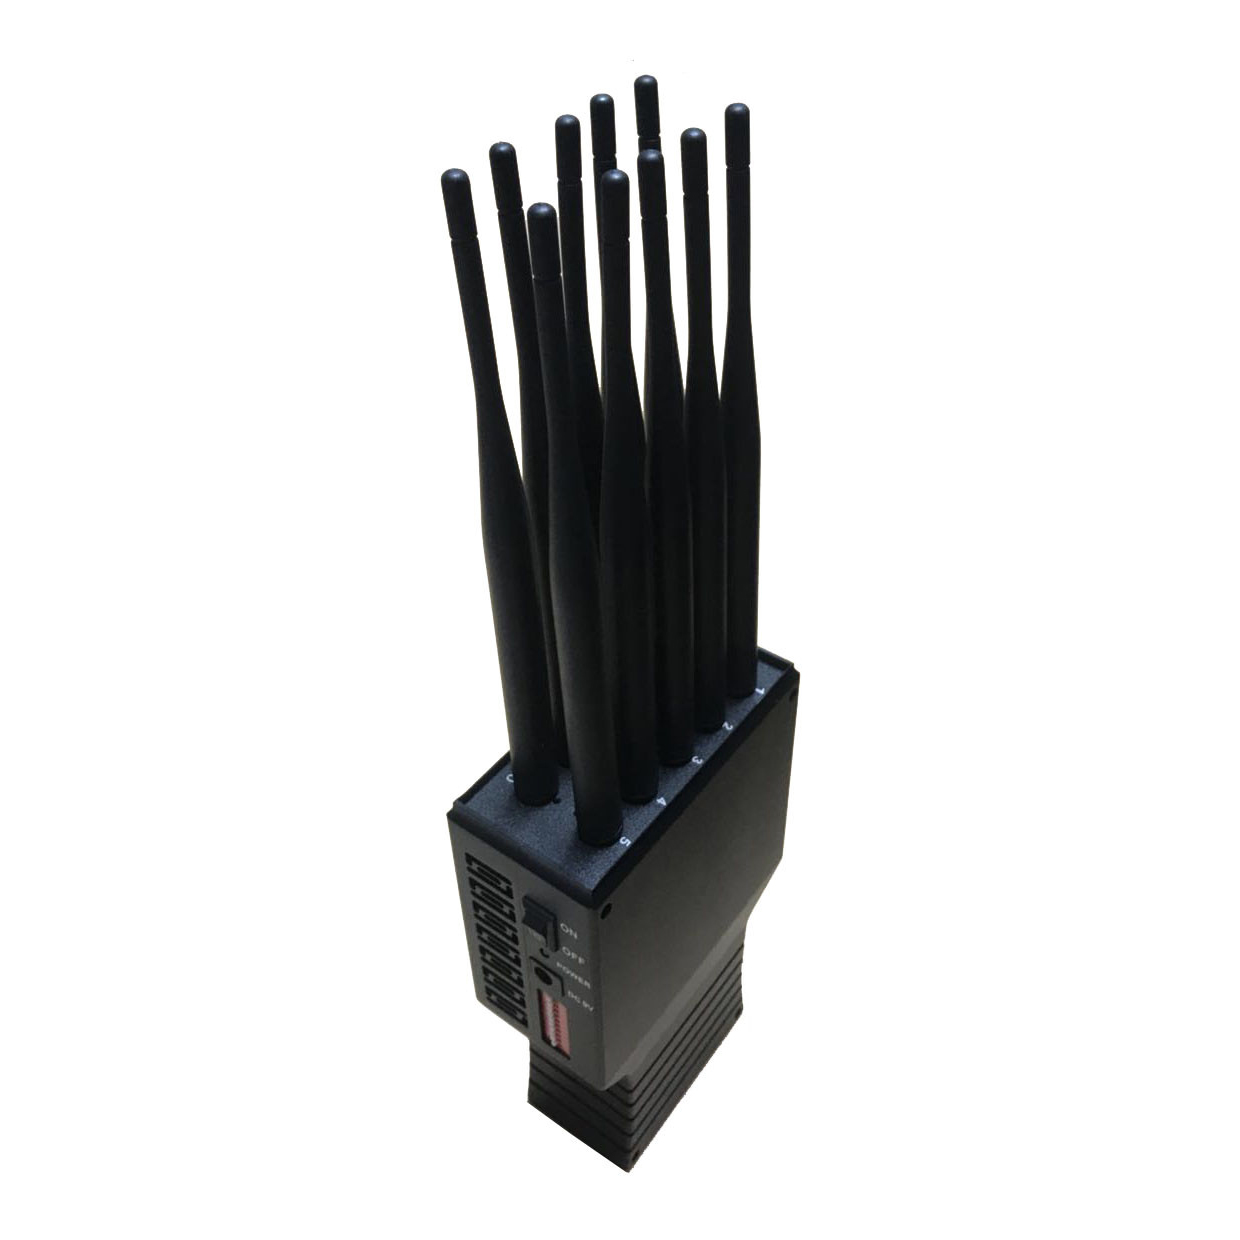 WiFi 2.4G signal Jamming device with removable antennas